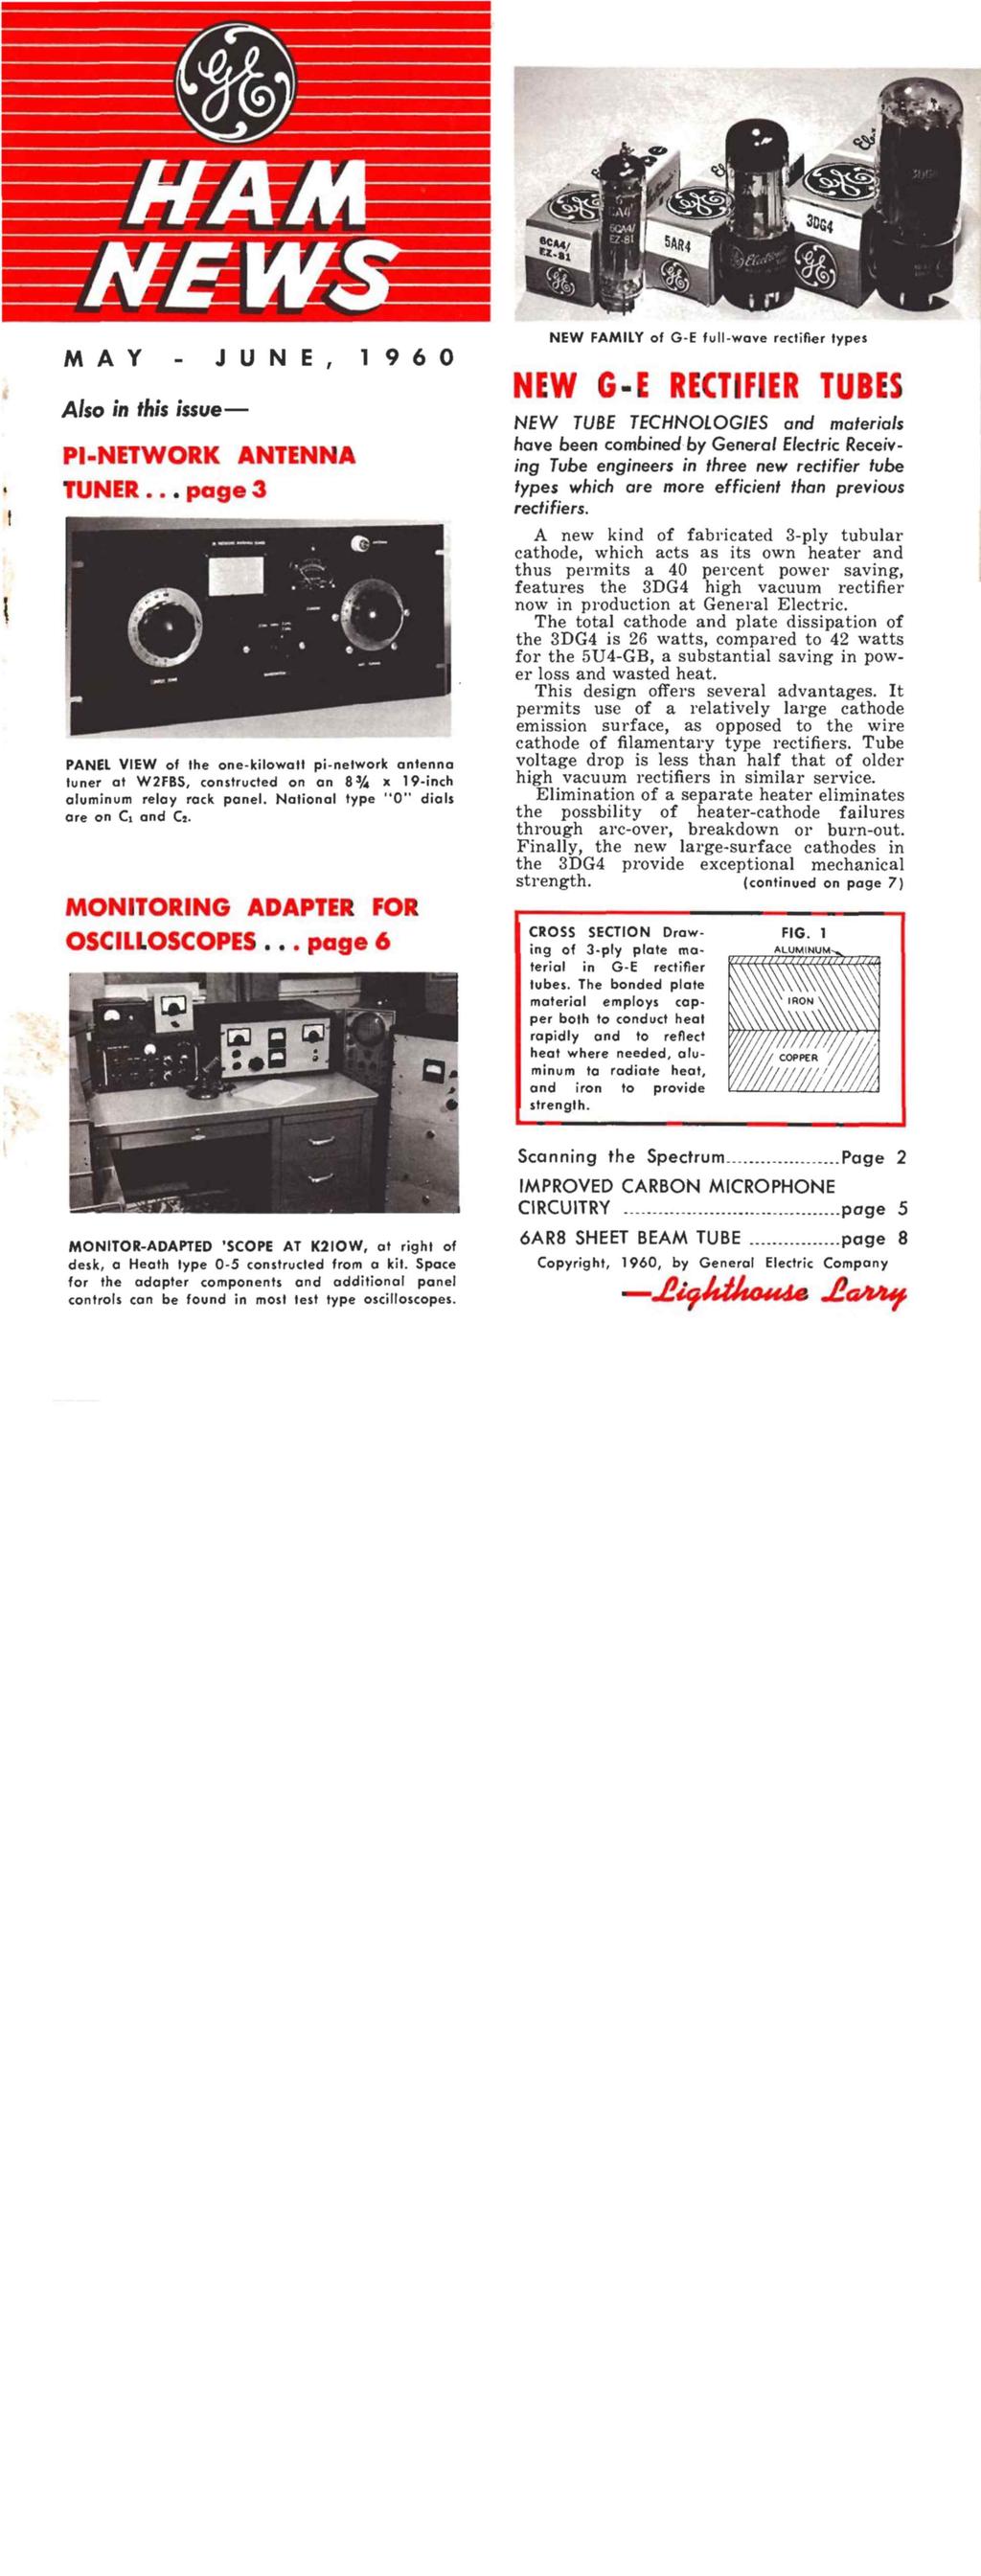 R9i 7.. -y'. ez et r,ac,u, z-s,, I i.,_ e re f f MAY - JUNE, 1 9 6 0 Also in this issue- P1-NETWORK ANTENNA TUNER.